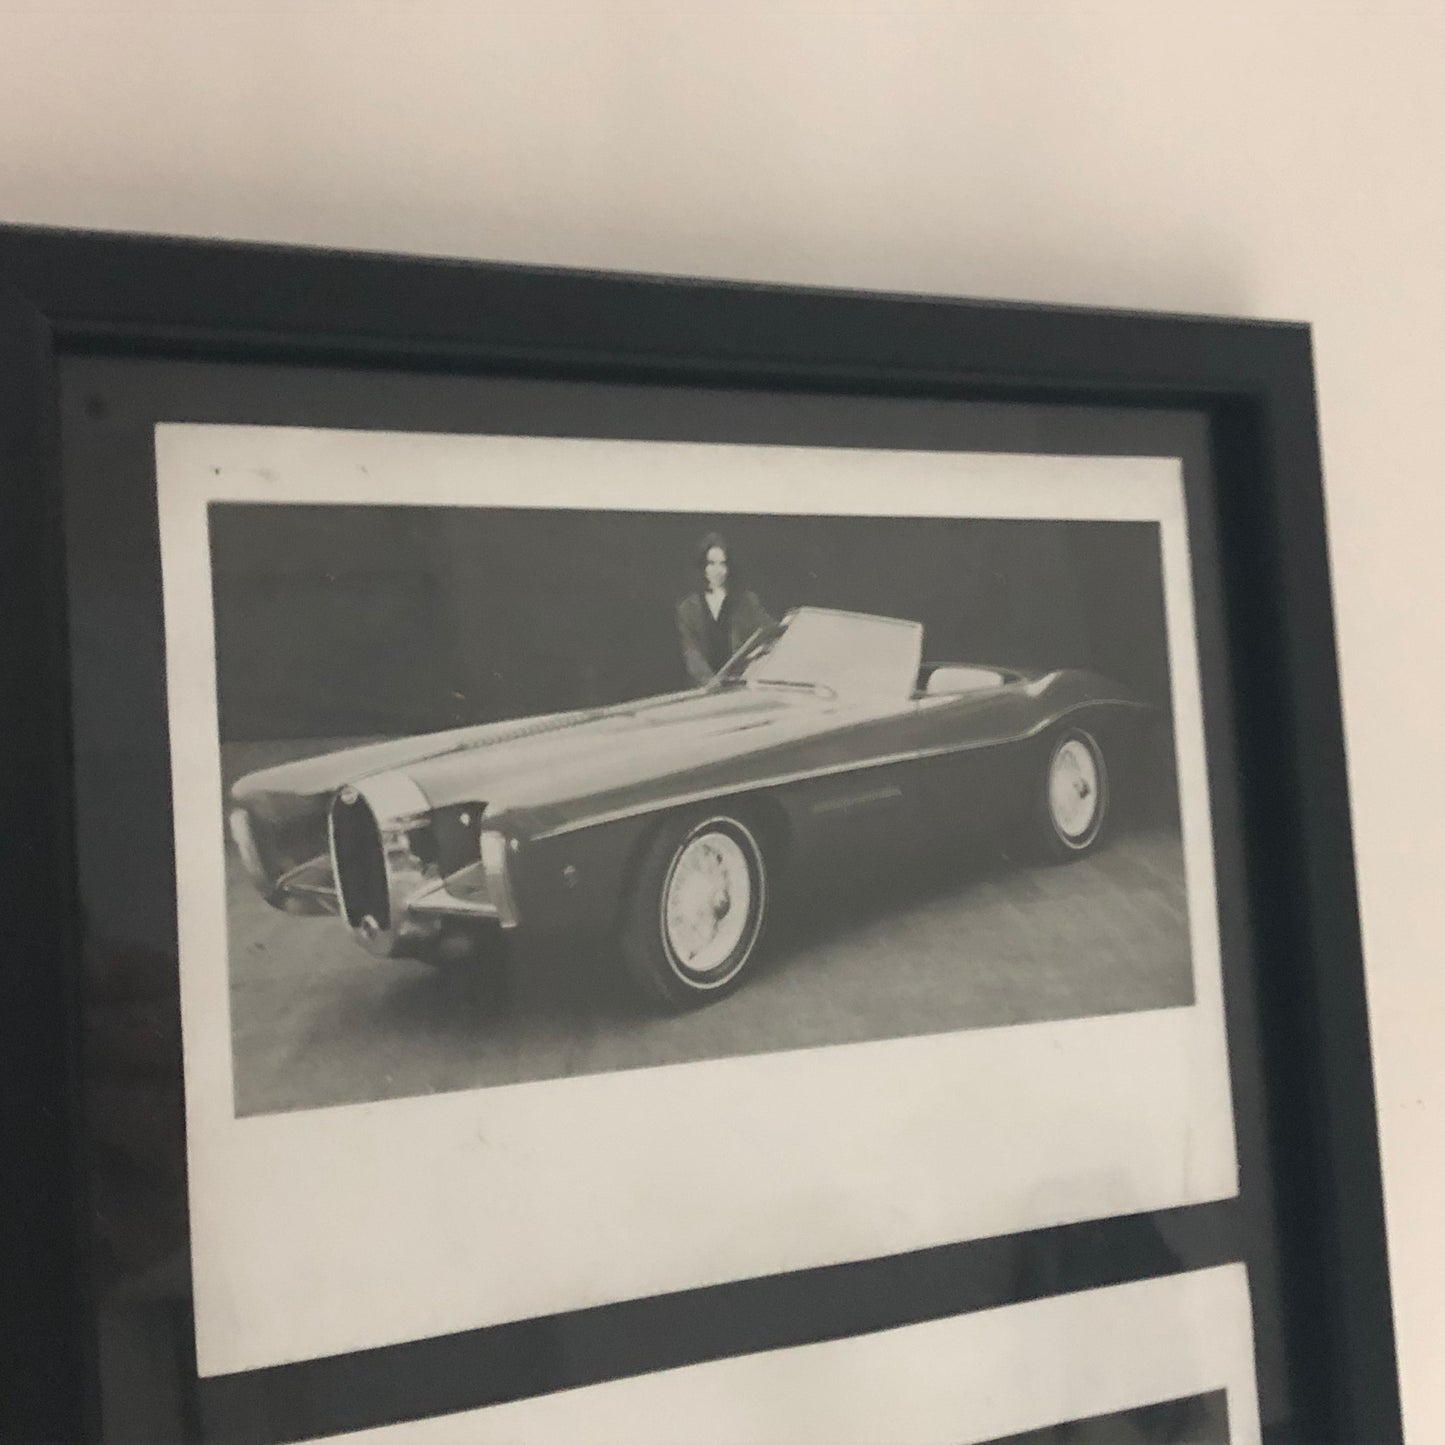 Bugatti, Photographs of the Presentation of the Bugatti Roadster Chassis Type 101-C with Ghia Bodywork